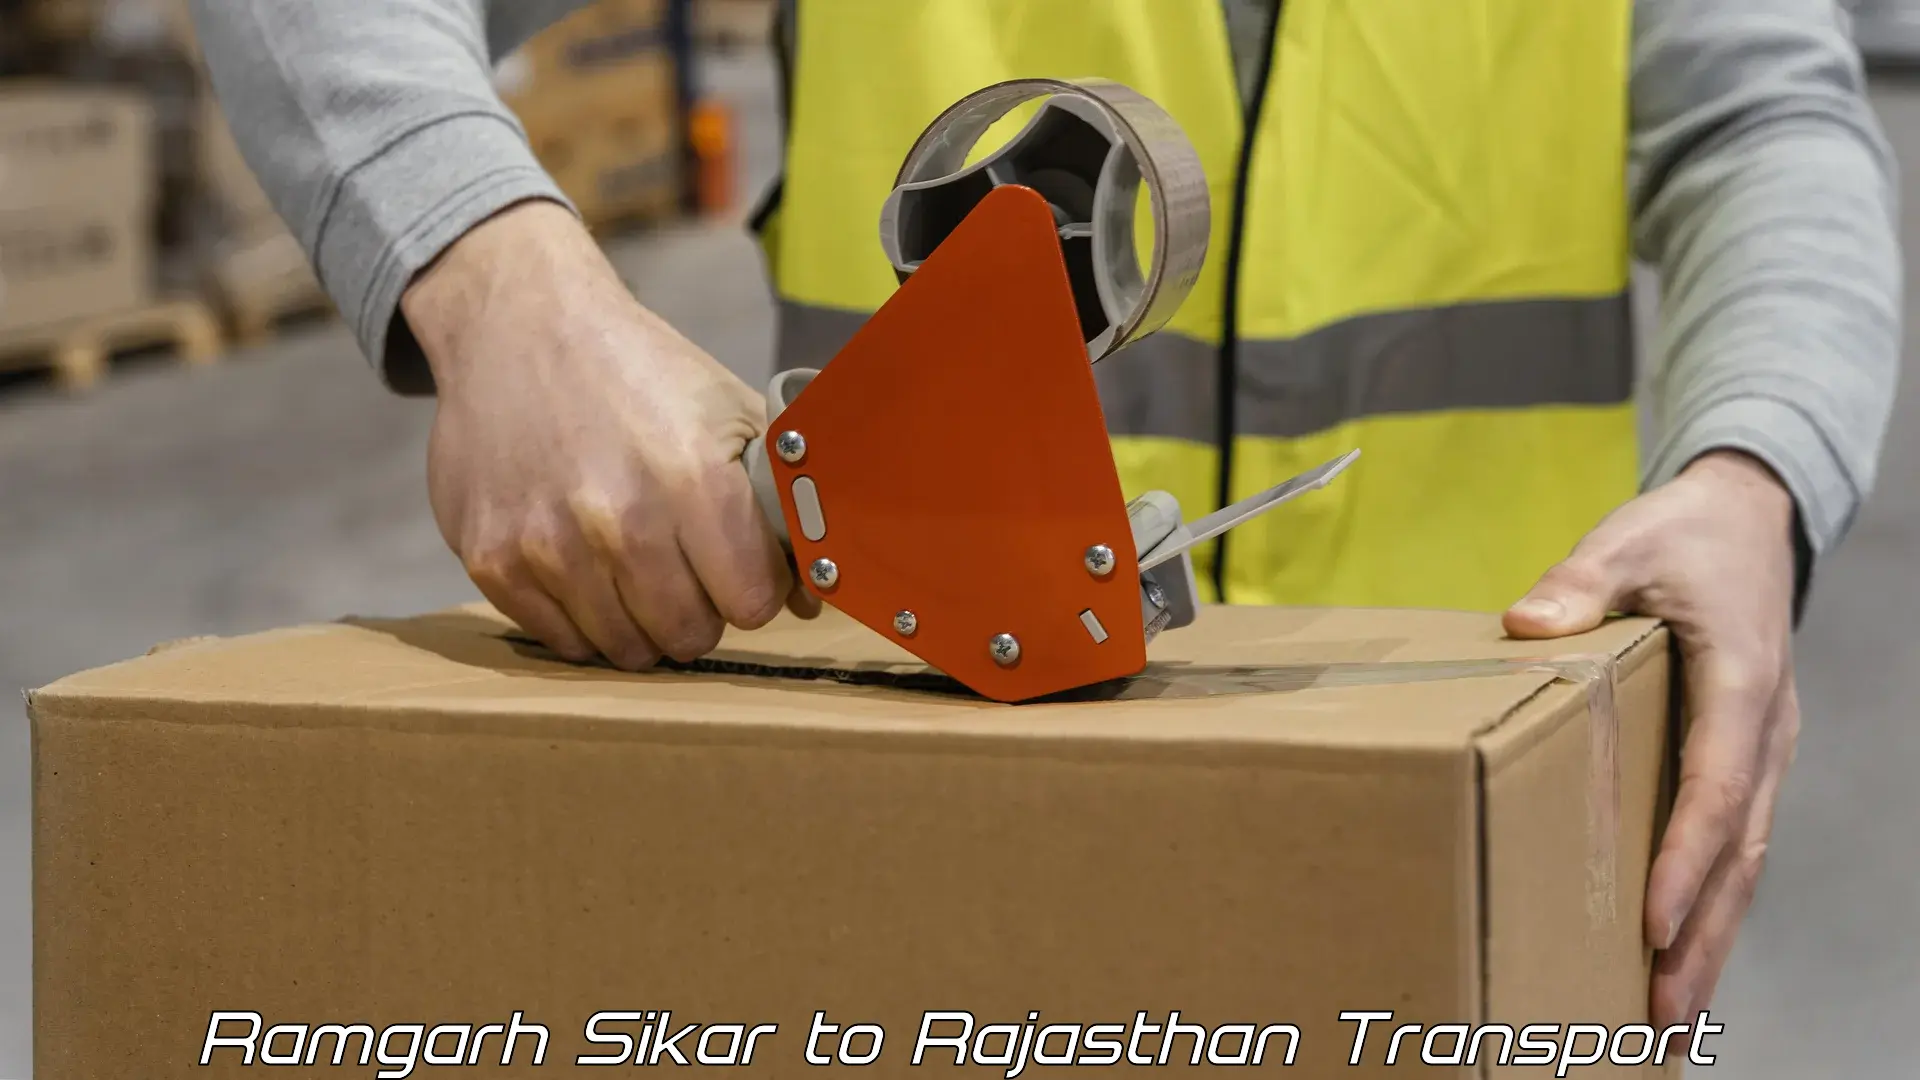 Parcel transport services Ramgarh Sikar to Rajasthan